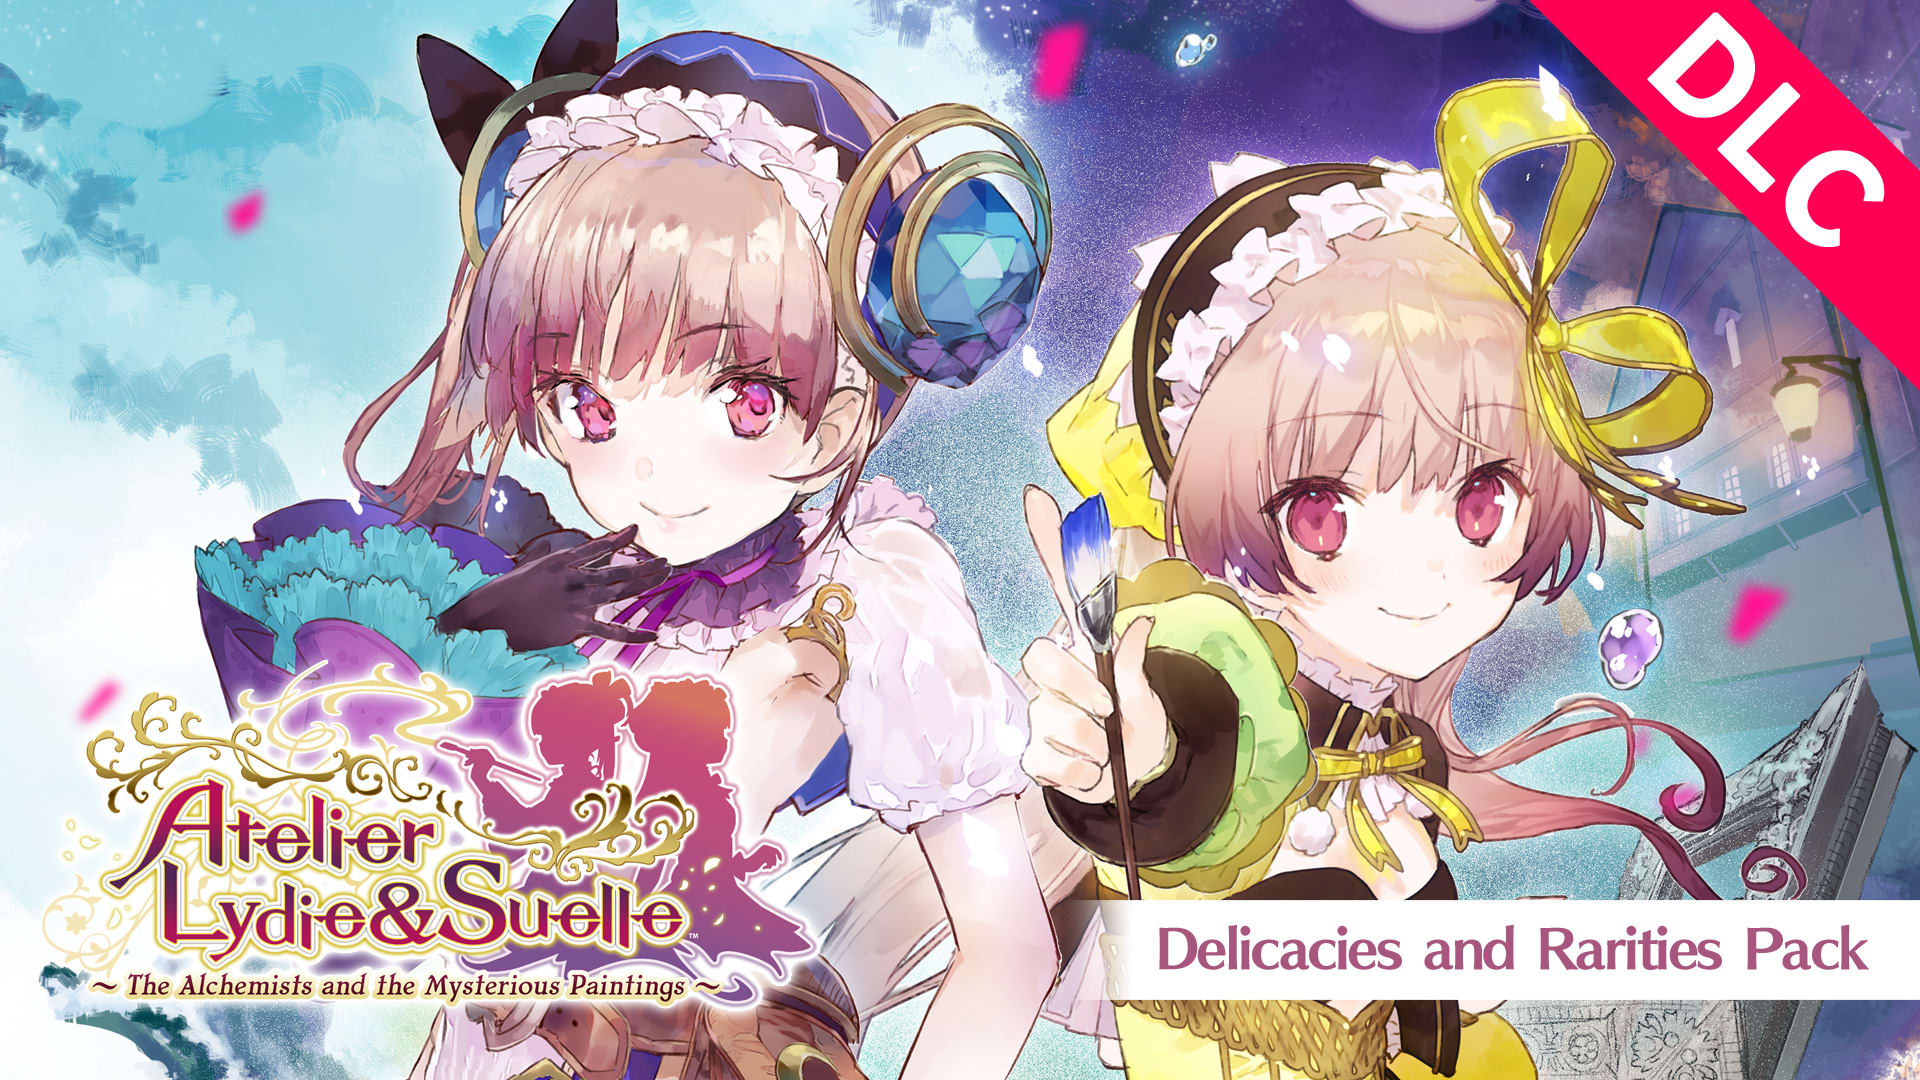 Atelier Lydie & Suelle: Delicacies and Rarities Pack